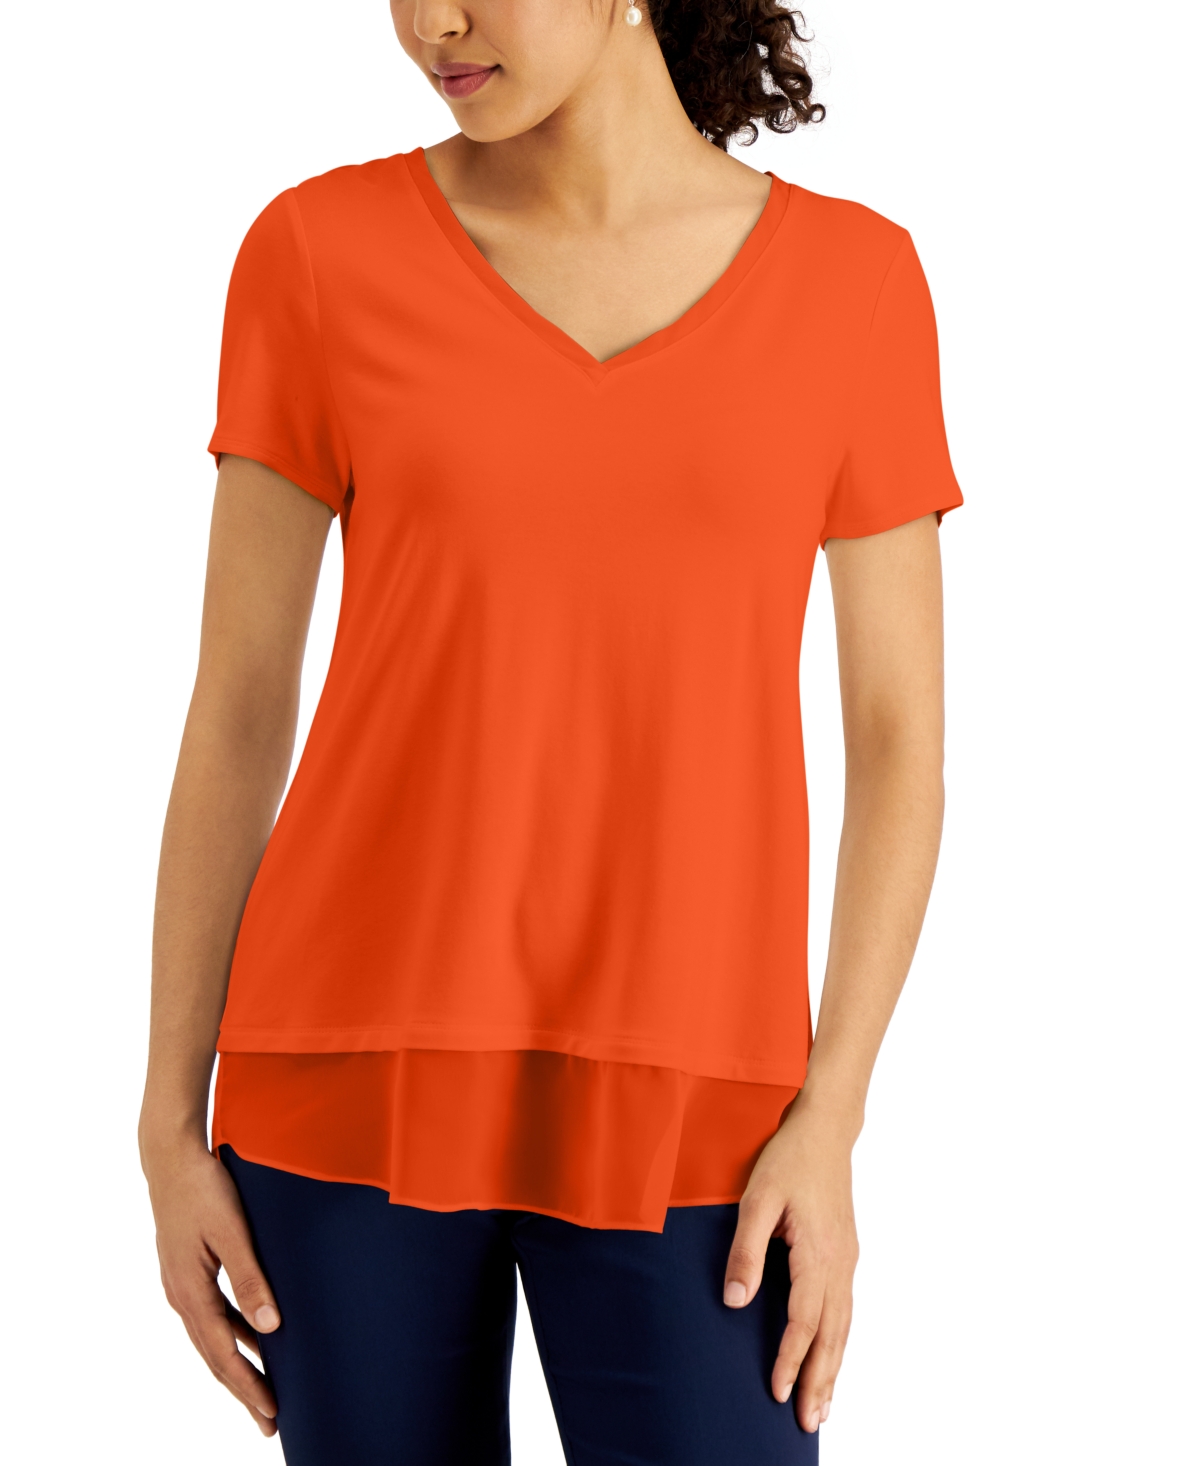 Jm Collection Women's Solid-Color Cold-Shoulder Top, Created for Macy's